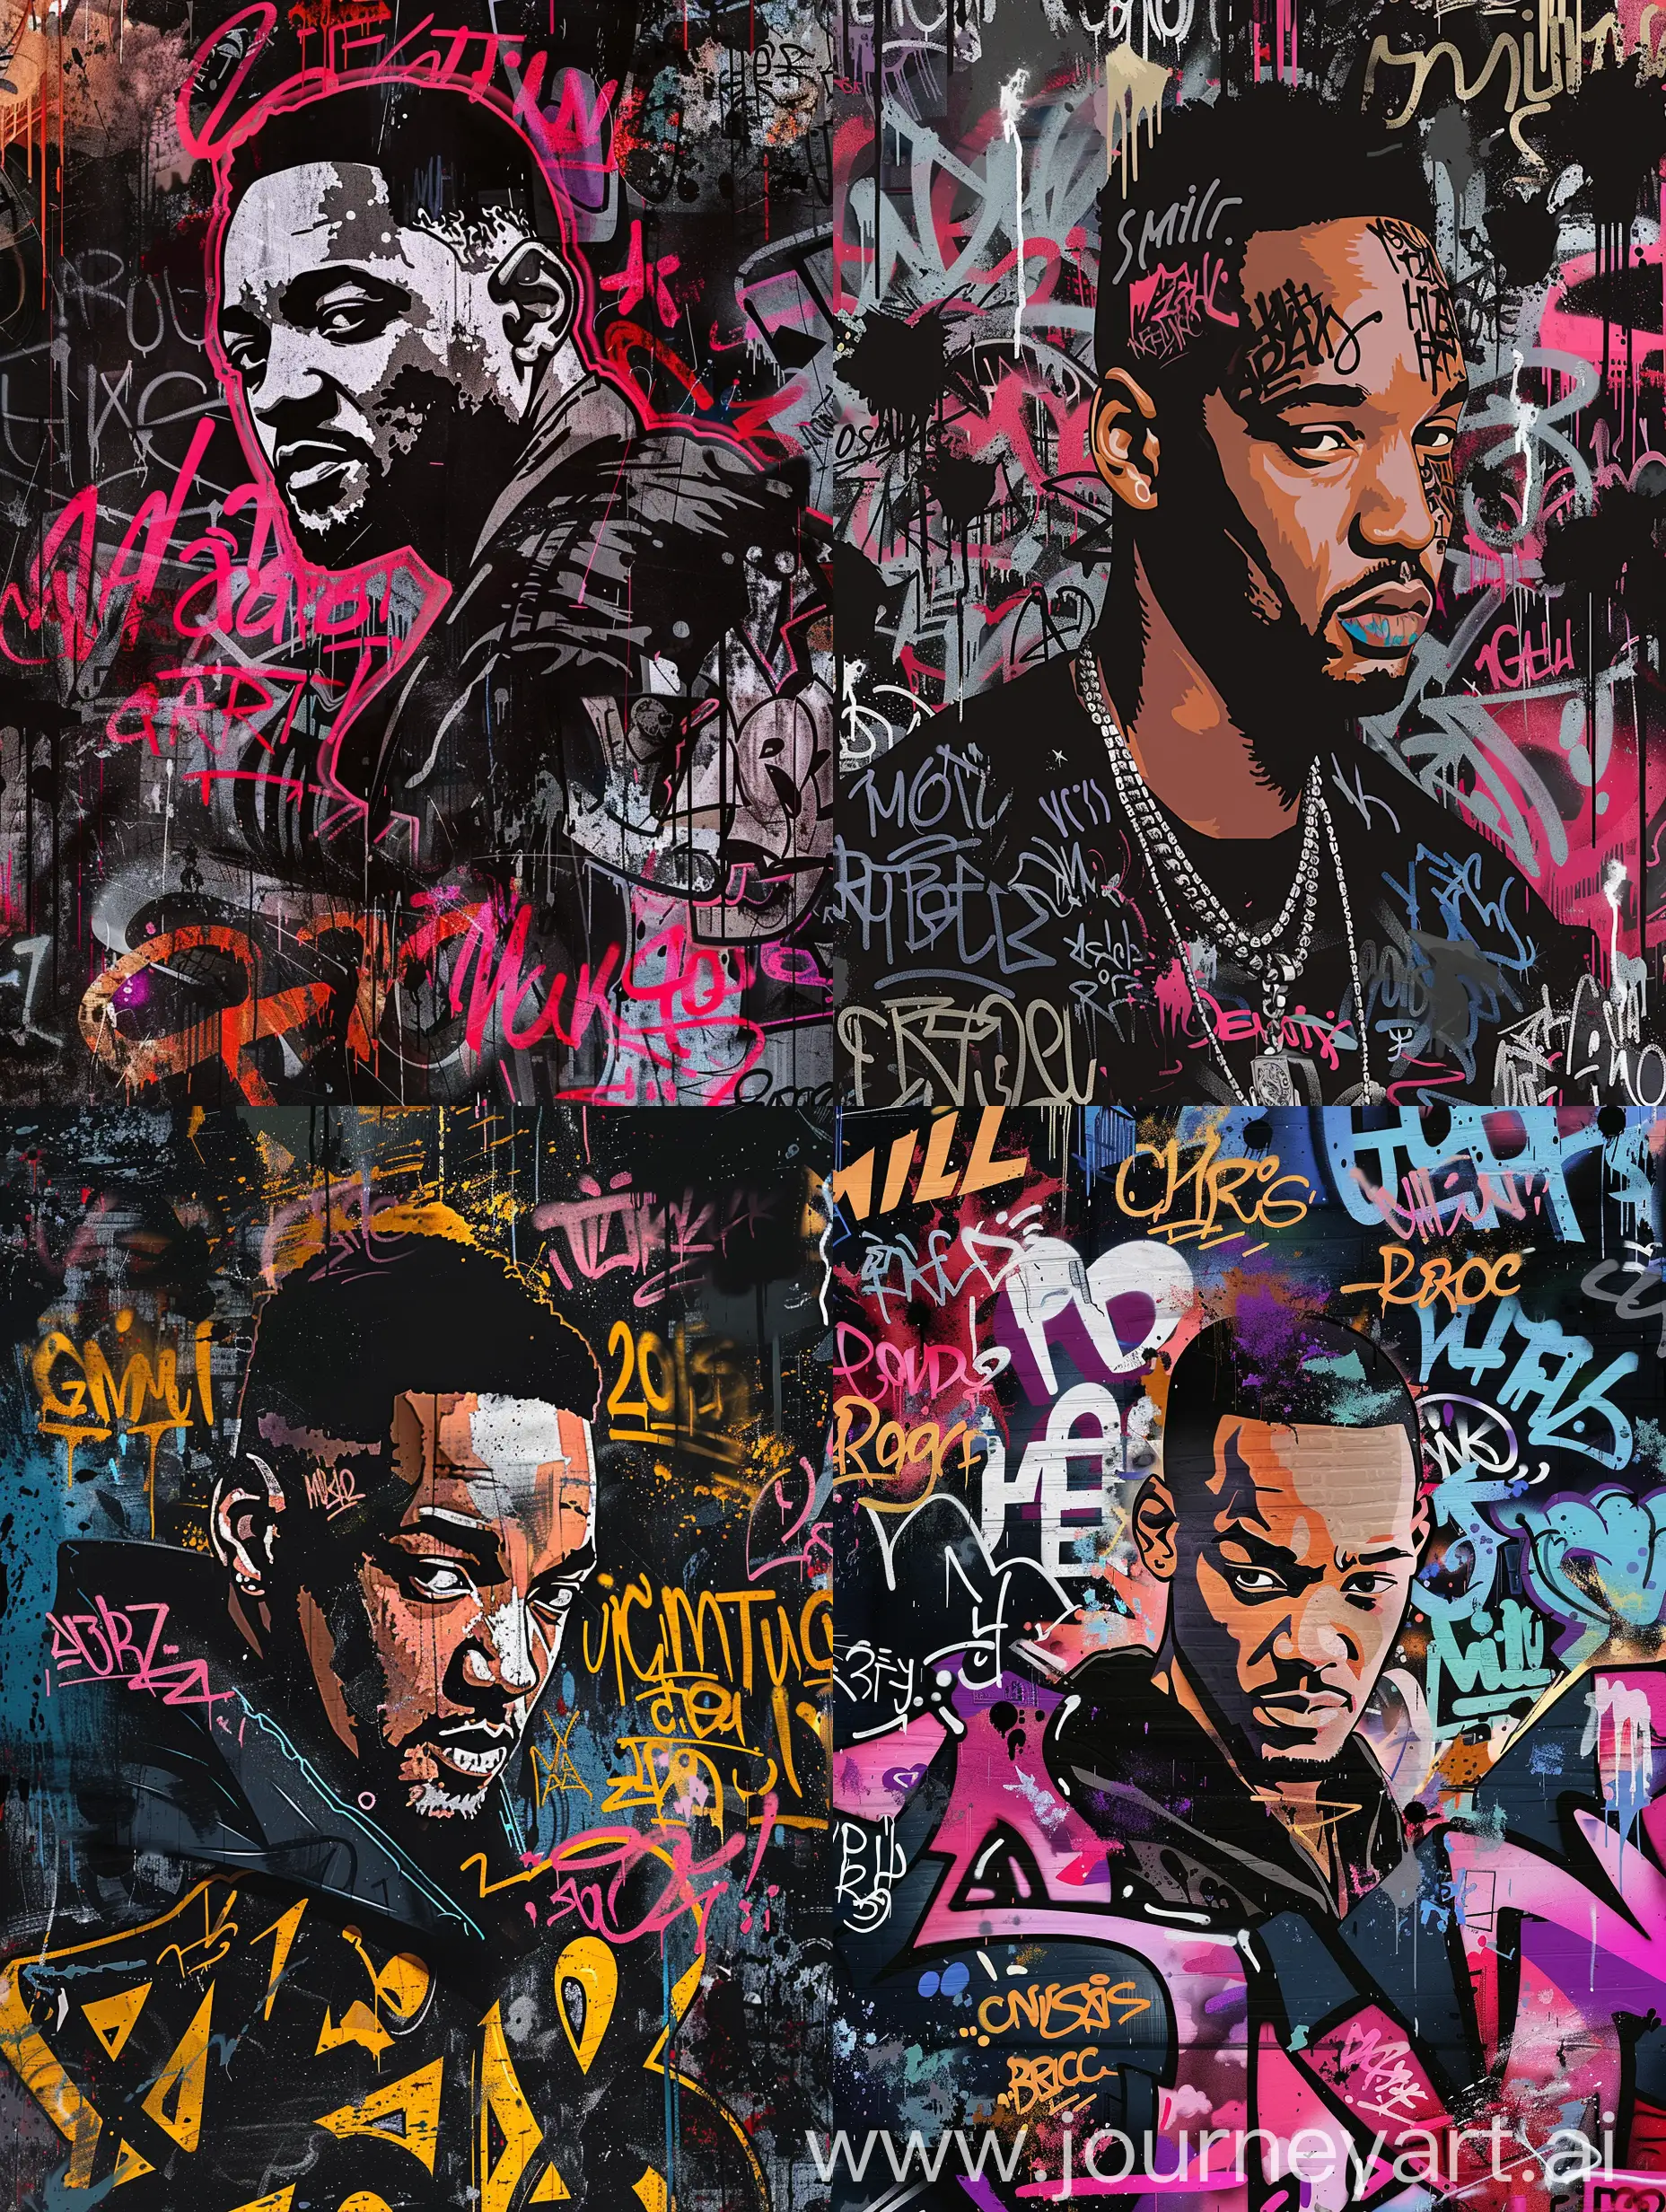 Celebrity-Clash-Will-Smith-Slapping-Chris-Rock-in-Graffiti-Style-Illustration